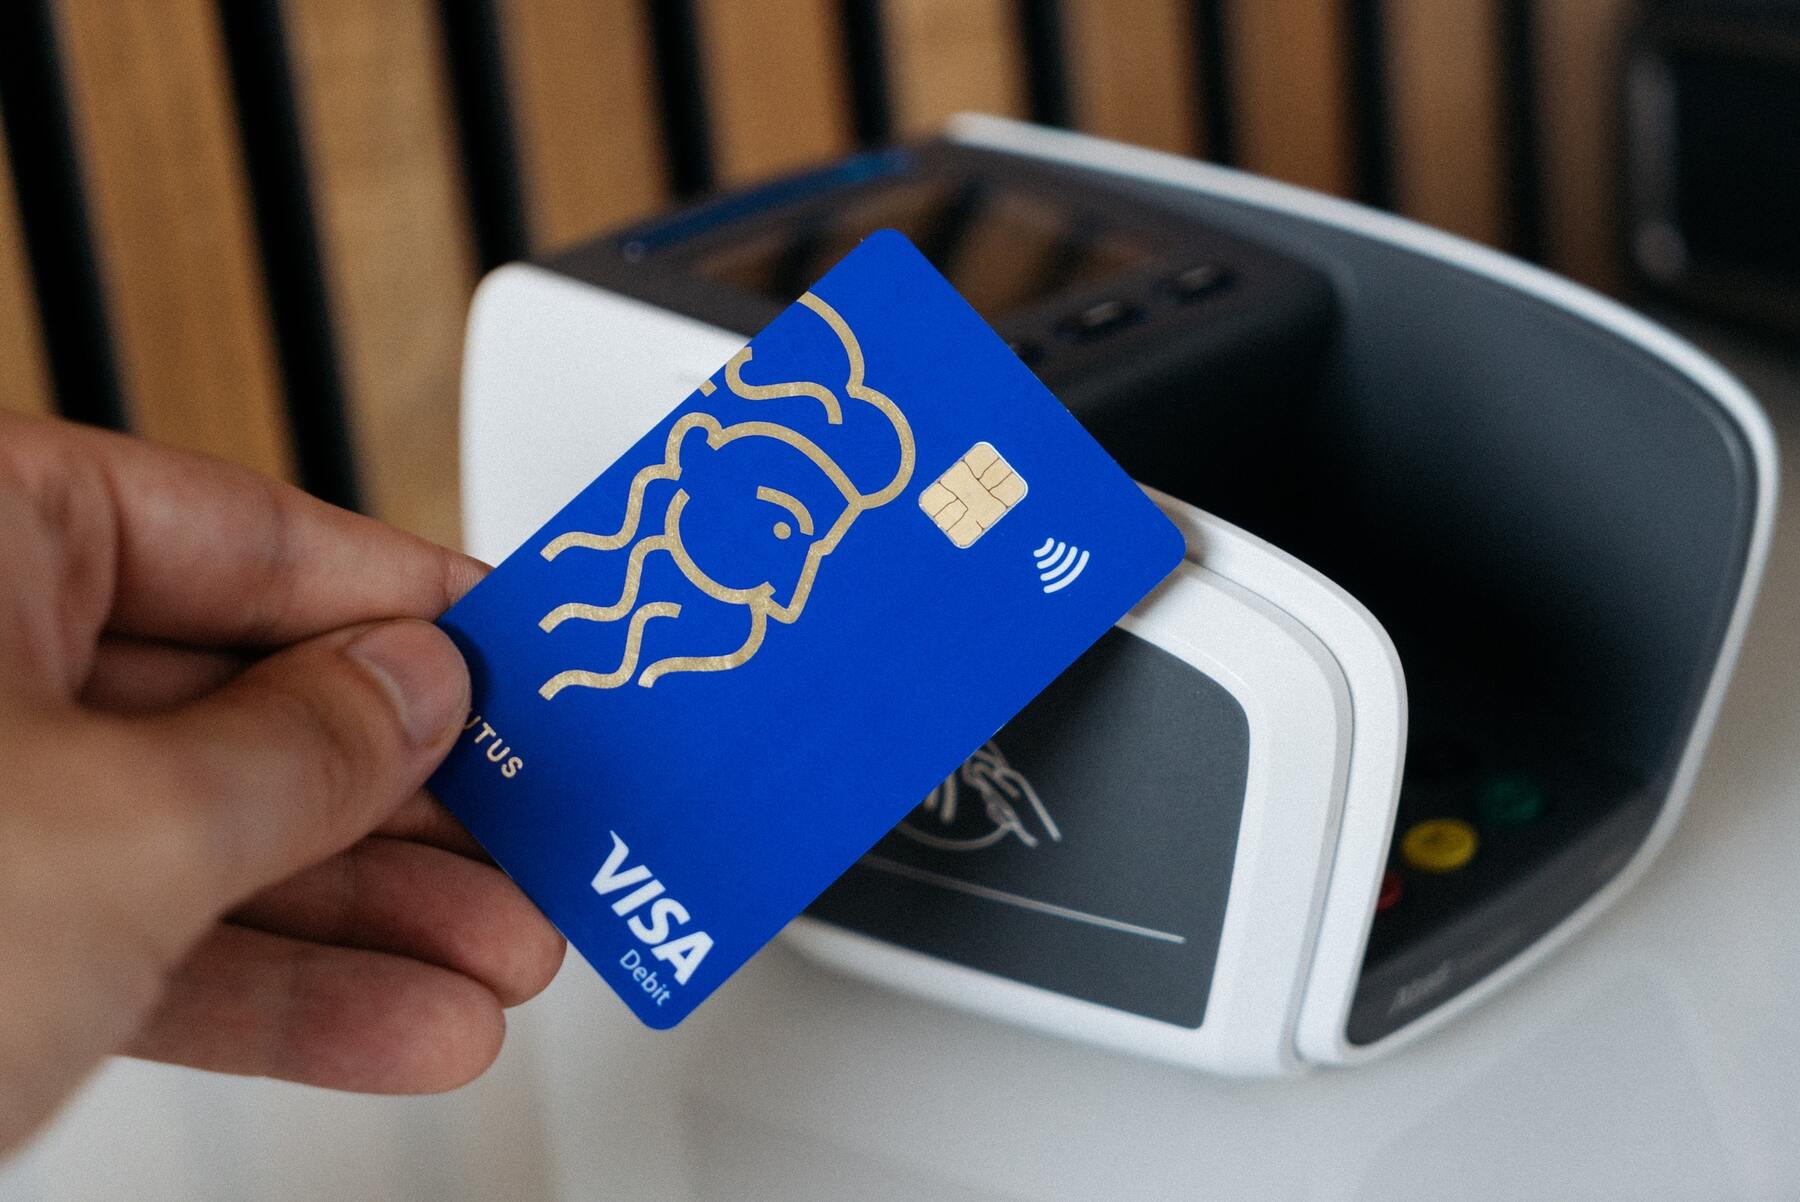 A blue credit card being tapped on a payment machine